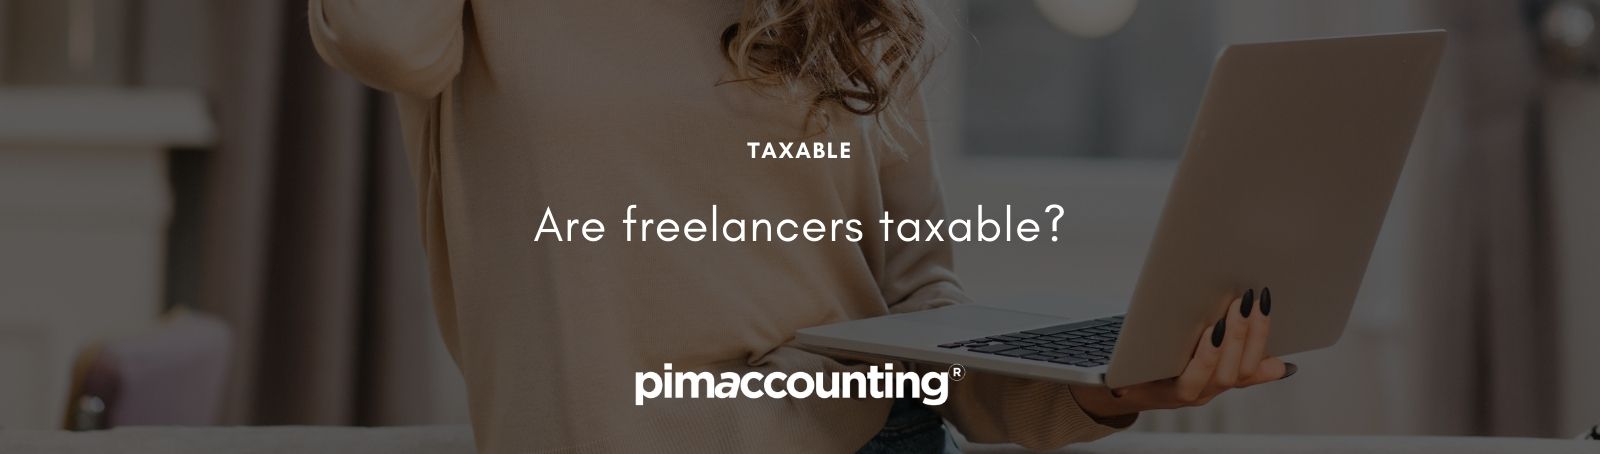 Are freelancers taxable